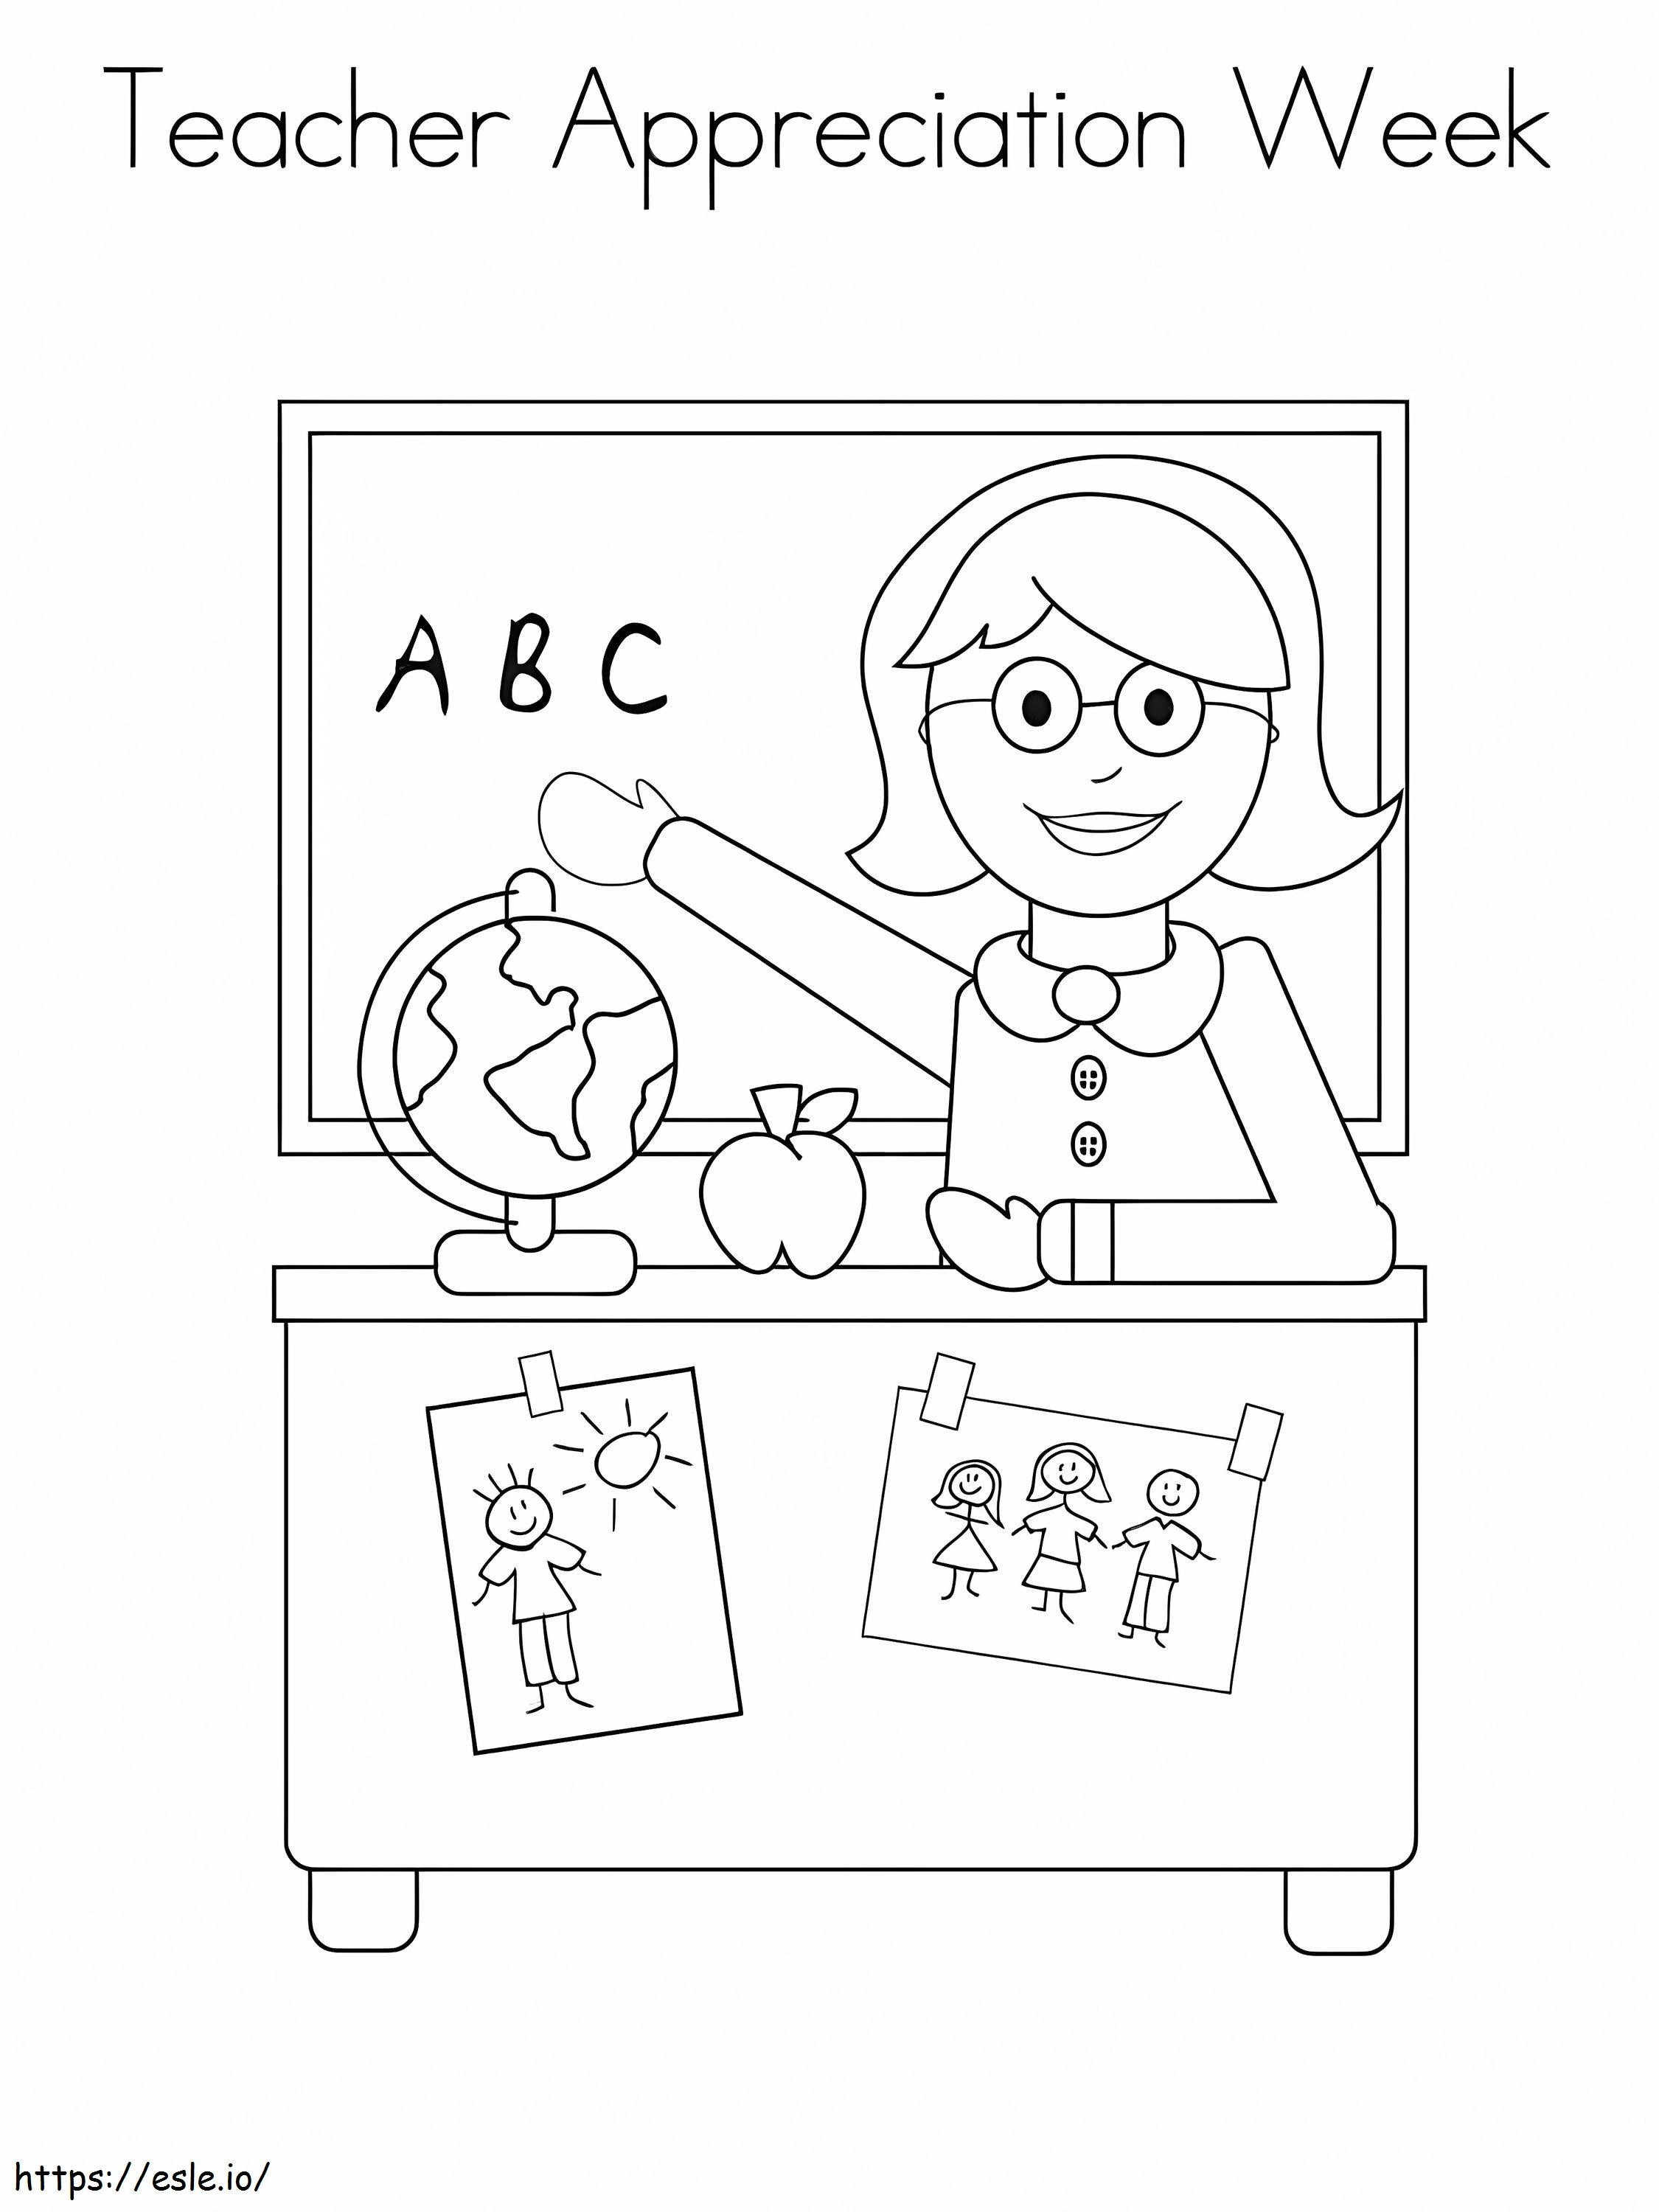 Fre Teacher Appreciation Week coloring page